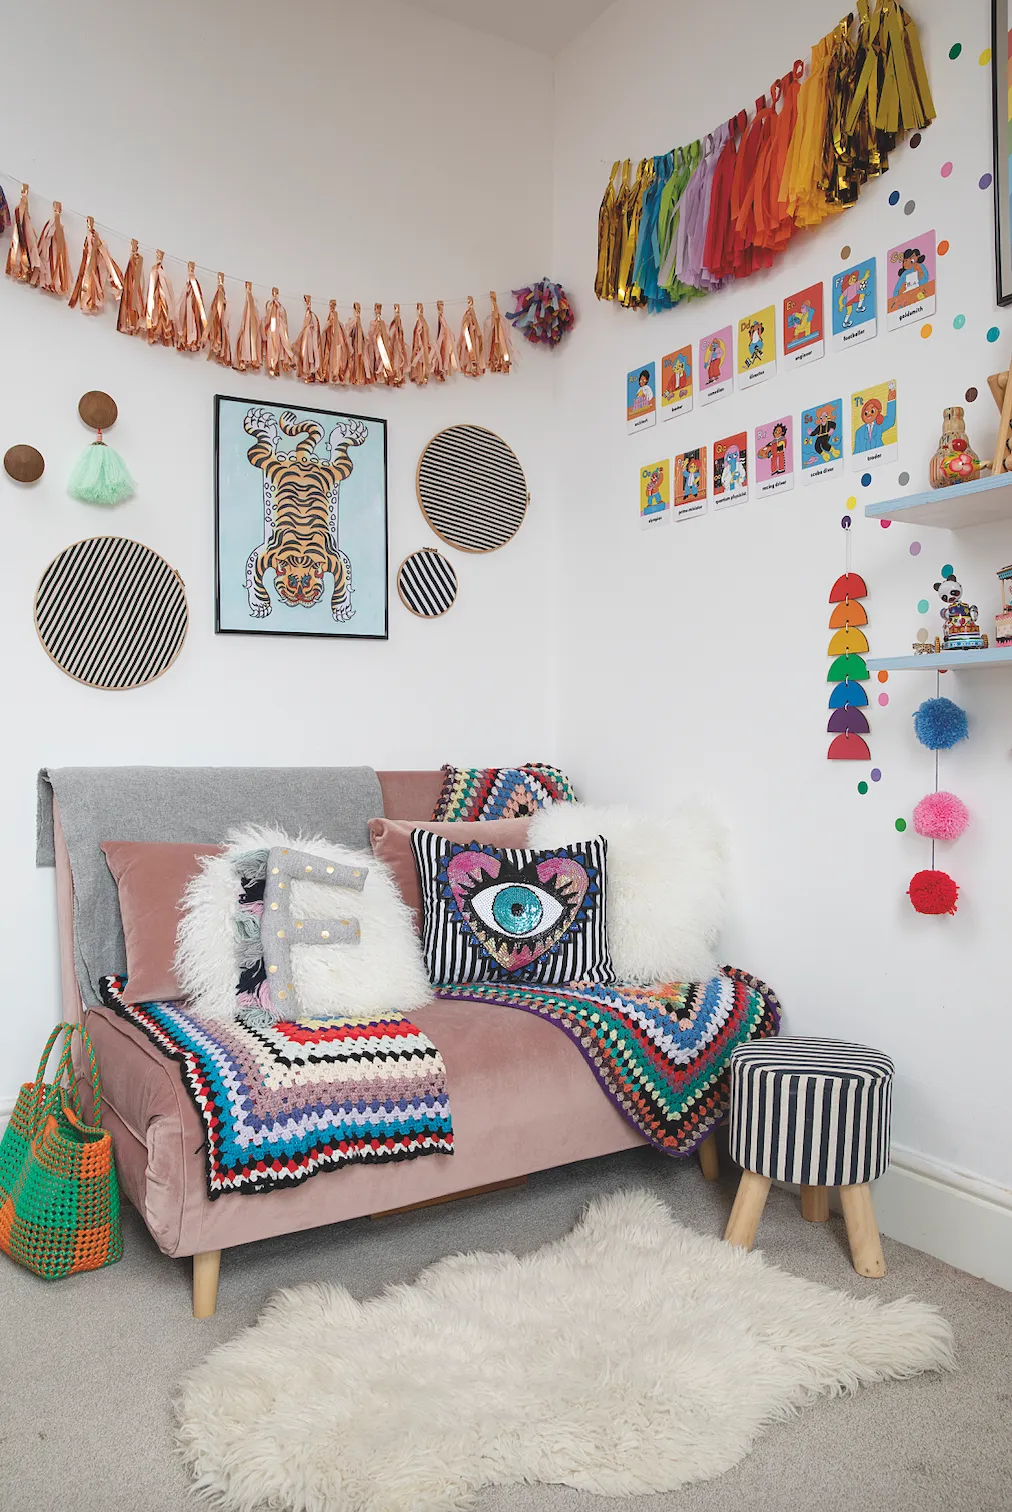 Bedroom makeover: 'Getting creative on a budget is my passion'